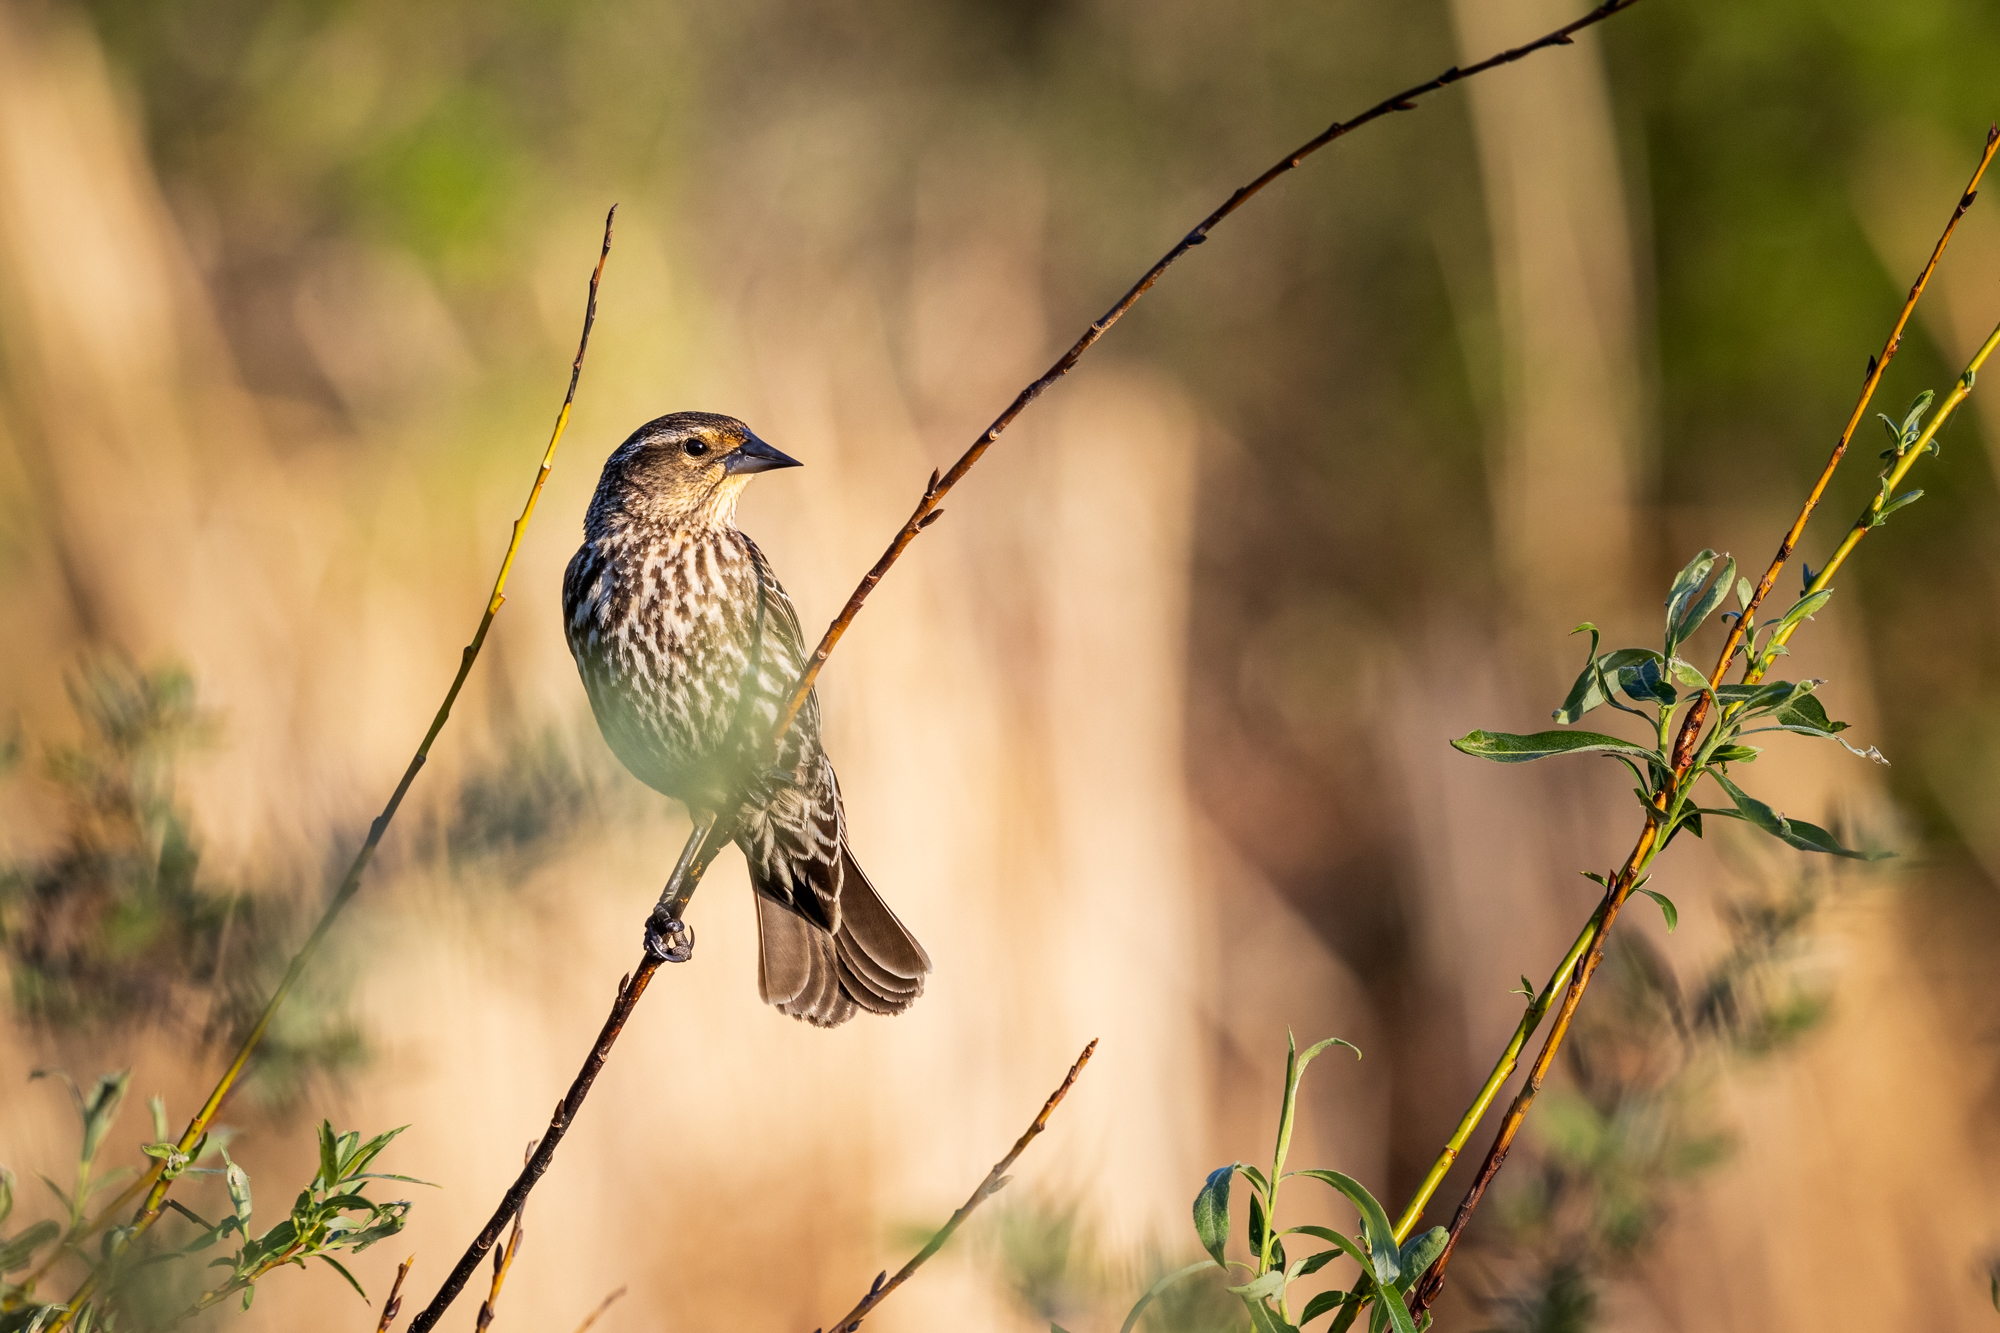 Female Red-Winged Blackbird on a branch